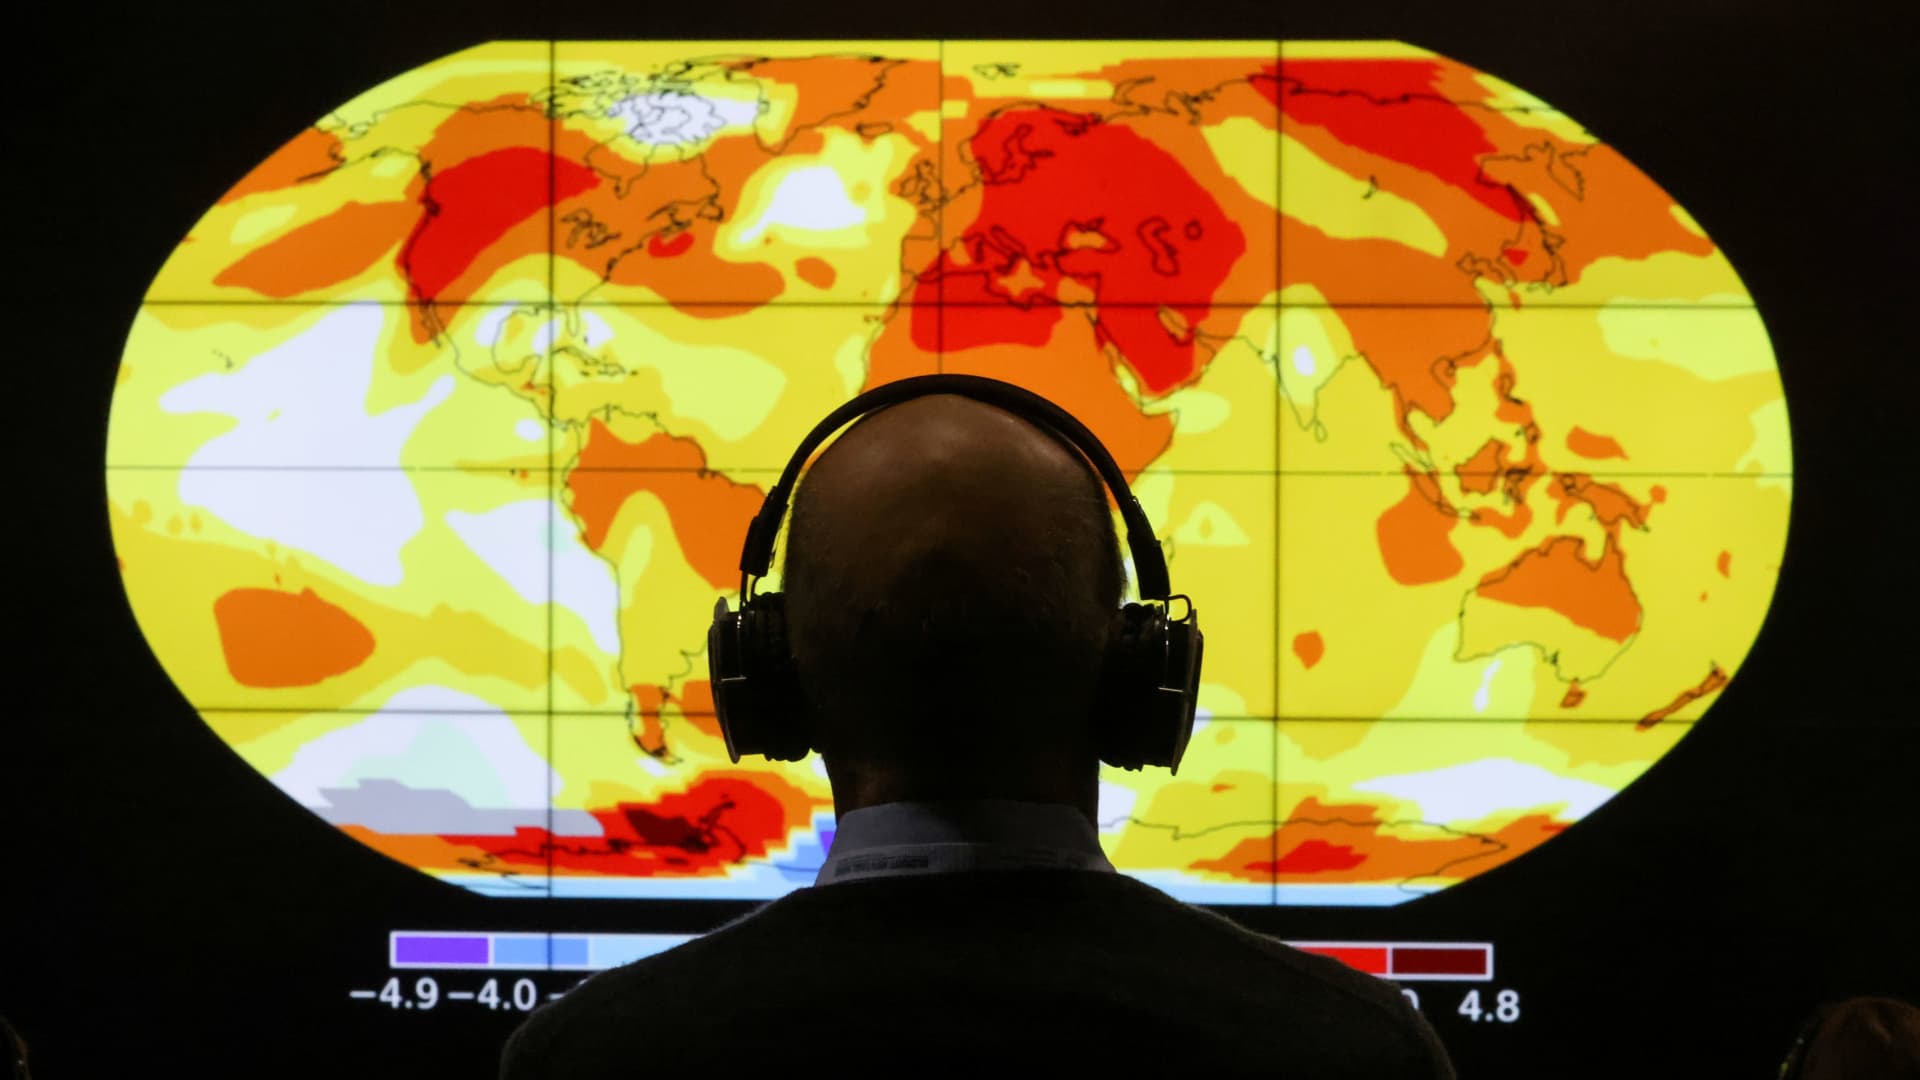 A delegate looks at a screen during the UN Climate Change Conference (COP26) in Glasgow, Scotland, Britain, November 8, 2021.